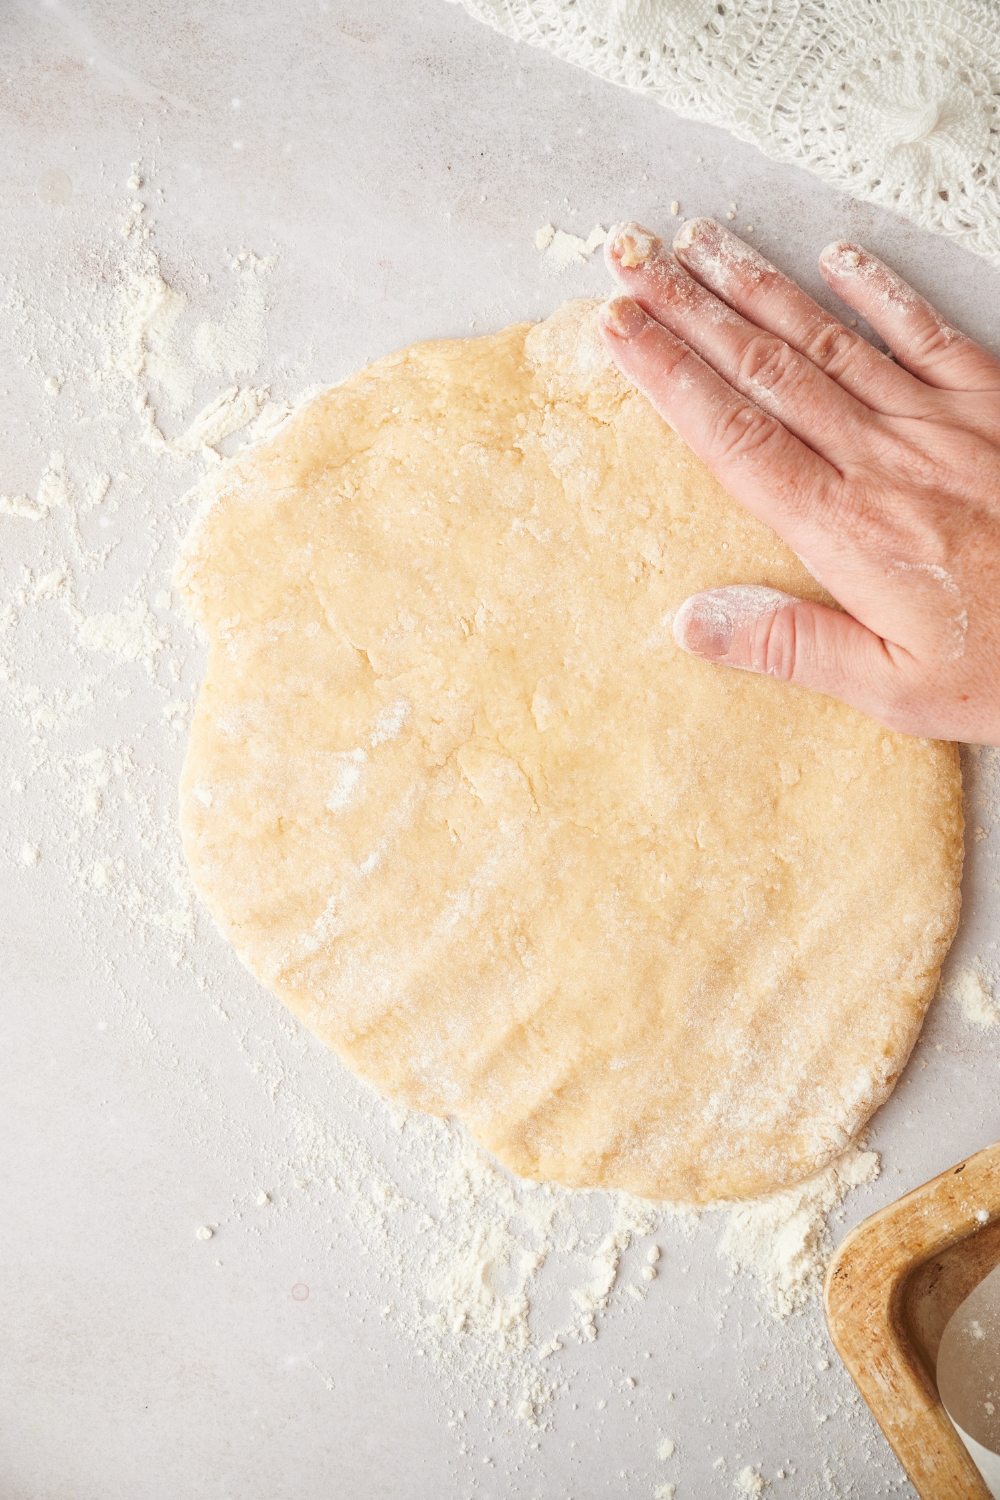 Someone smooths out the biscuit dough with their hand on a floured surface.